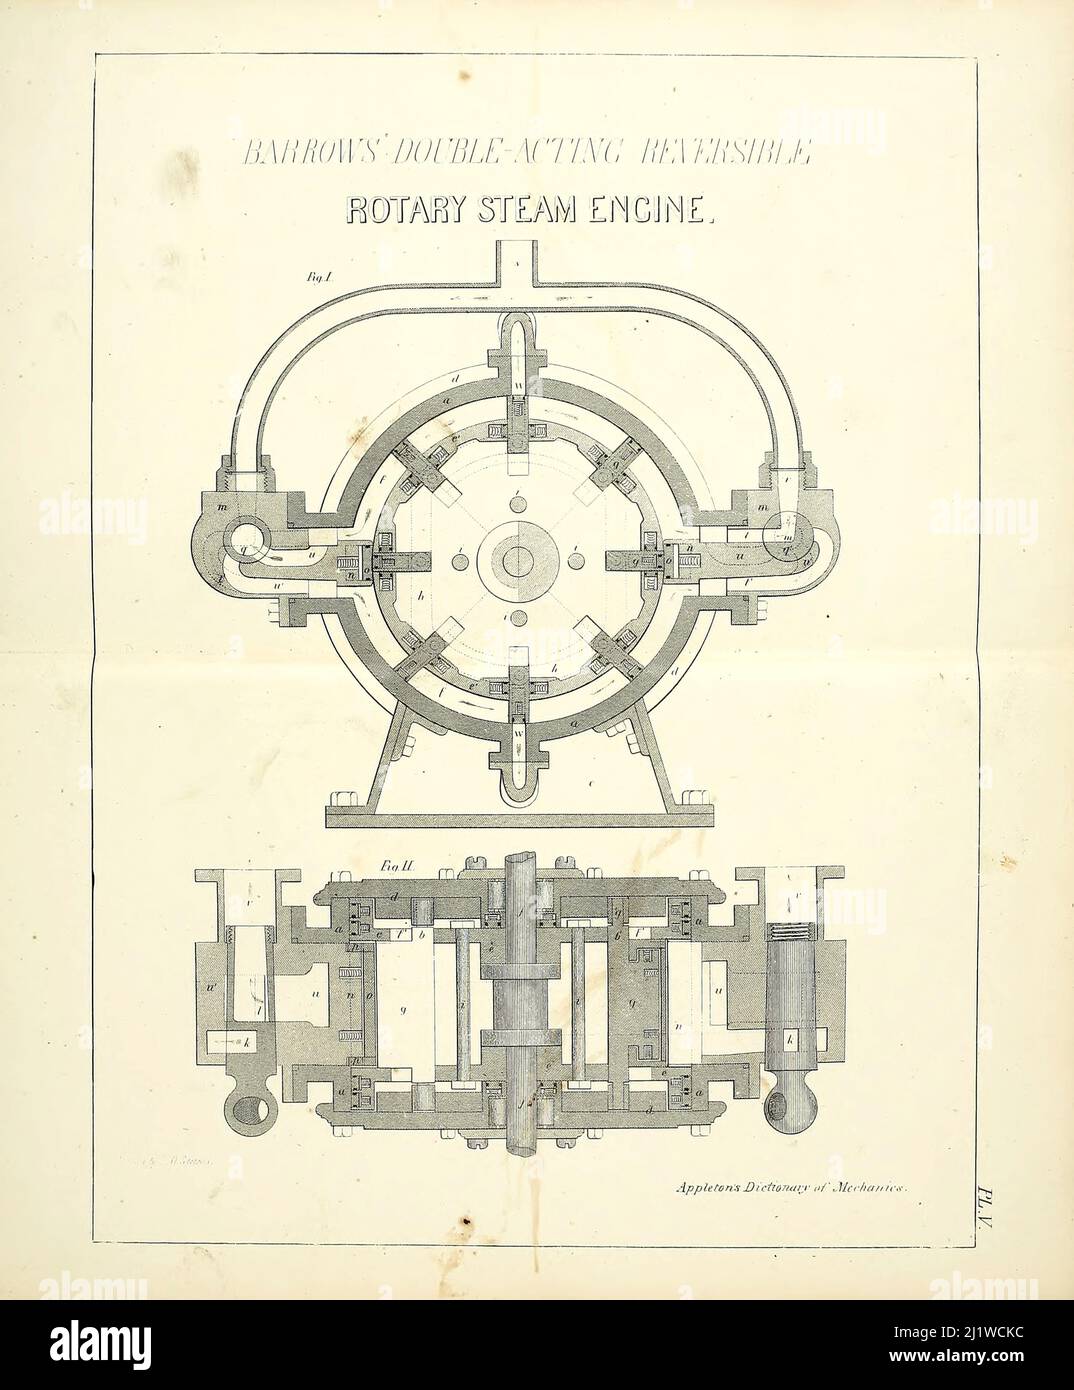 Rotary steam Engine from Appleton's dictionary of machines, mechanics, engine-work, and engineering : illustrated with four thousand engravings on wood ; in two volumes by D. Appleton and Company Published New York : D. Appleton and Co 1873 Stock Photo